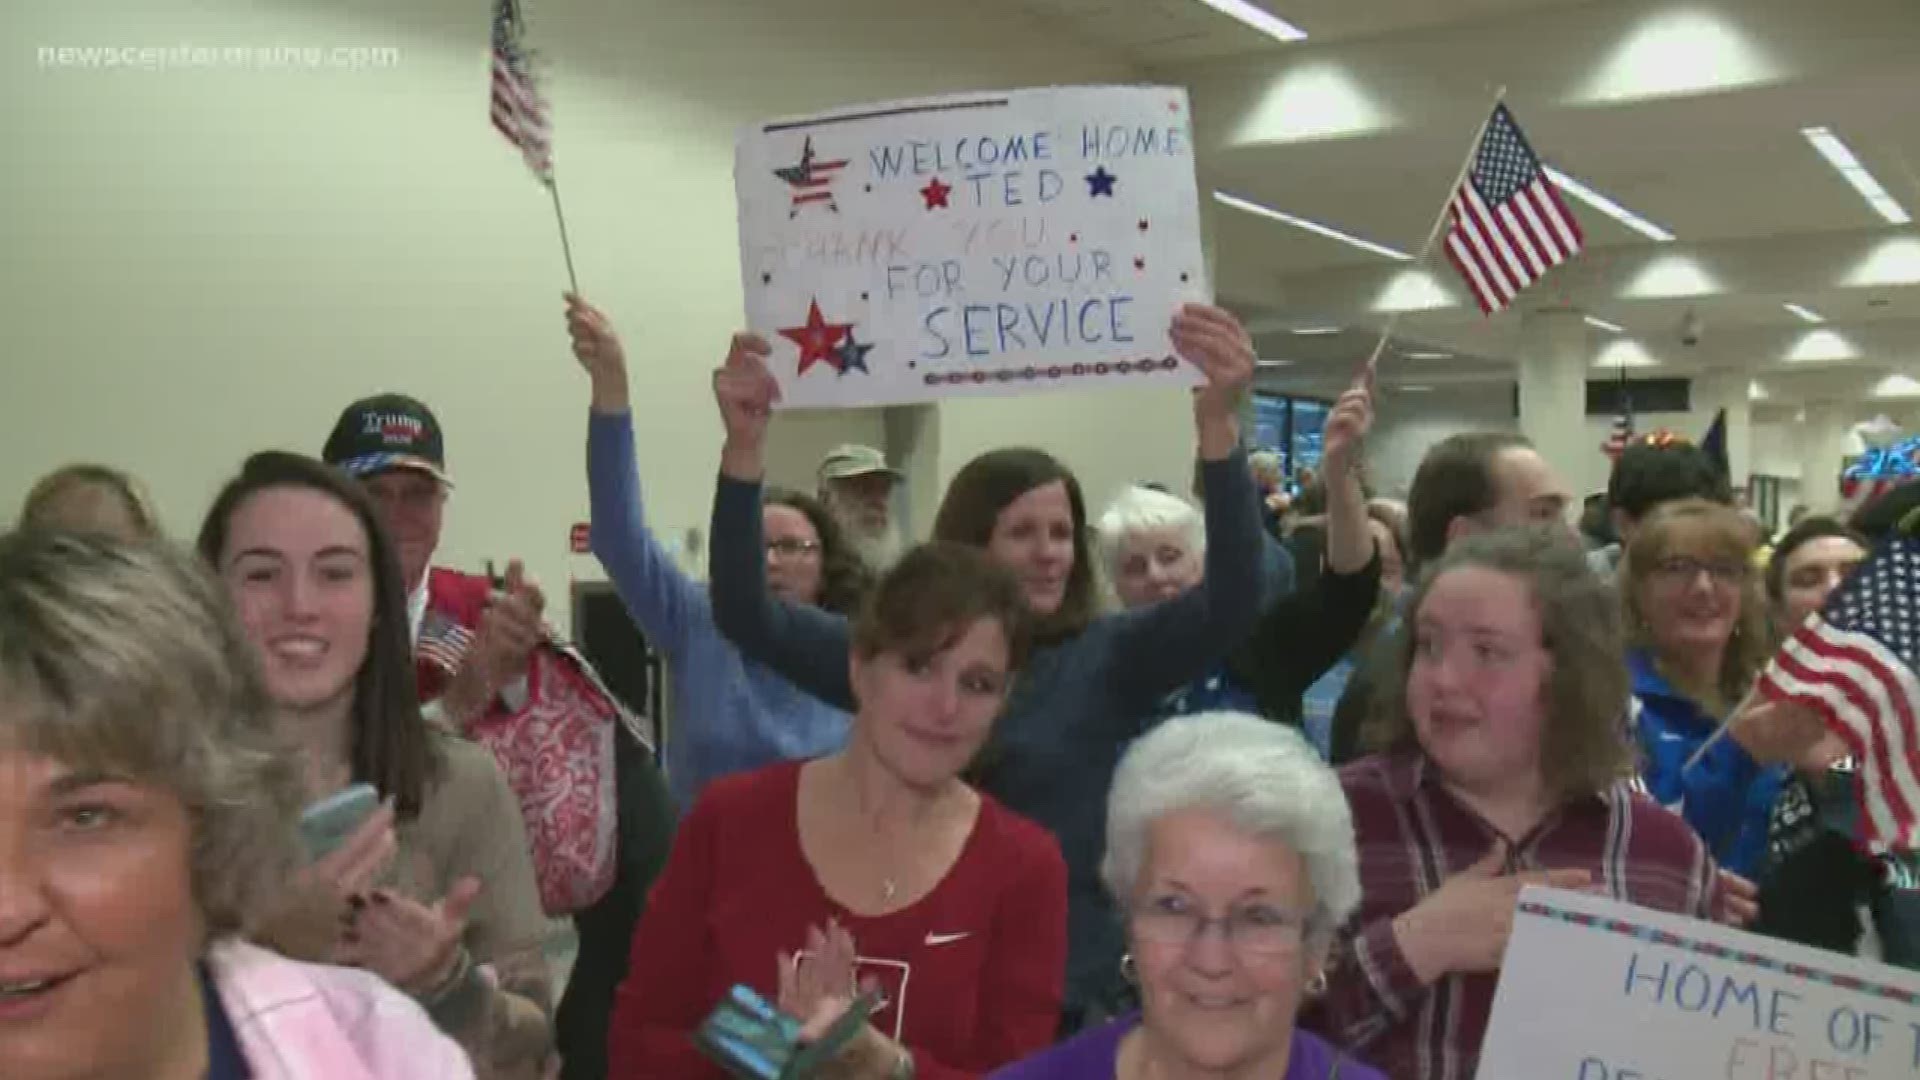 A welcome home ceremony was held in Portland for Honor Flight veterans.